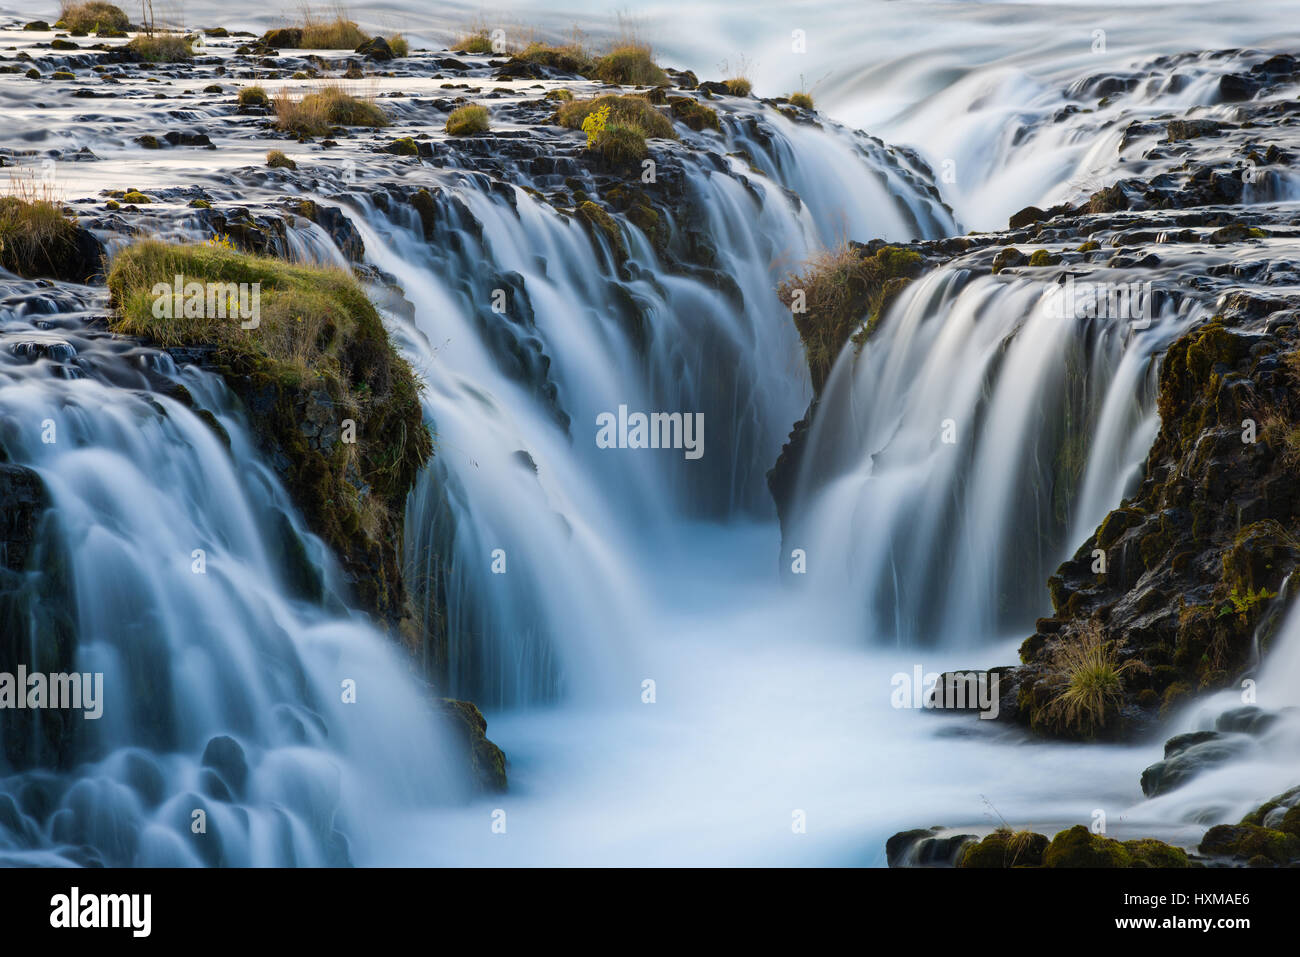 Detail shot of Bruarafoss or Bruarfoss waterfall as the blue glacial water flows over it, Iceland Stock Photo